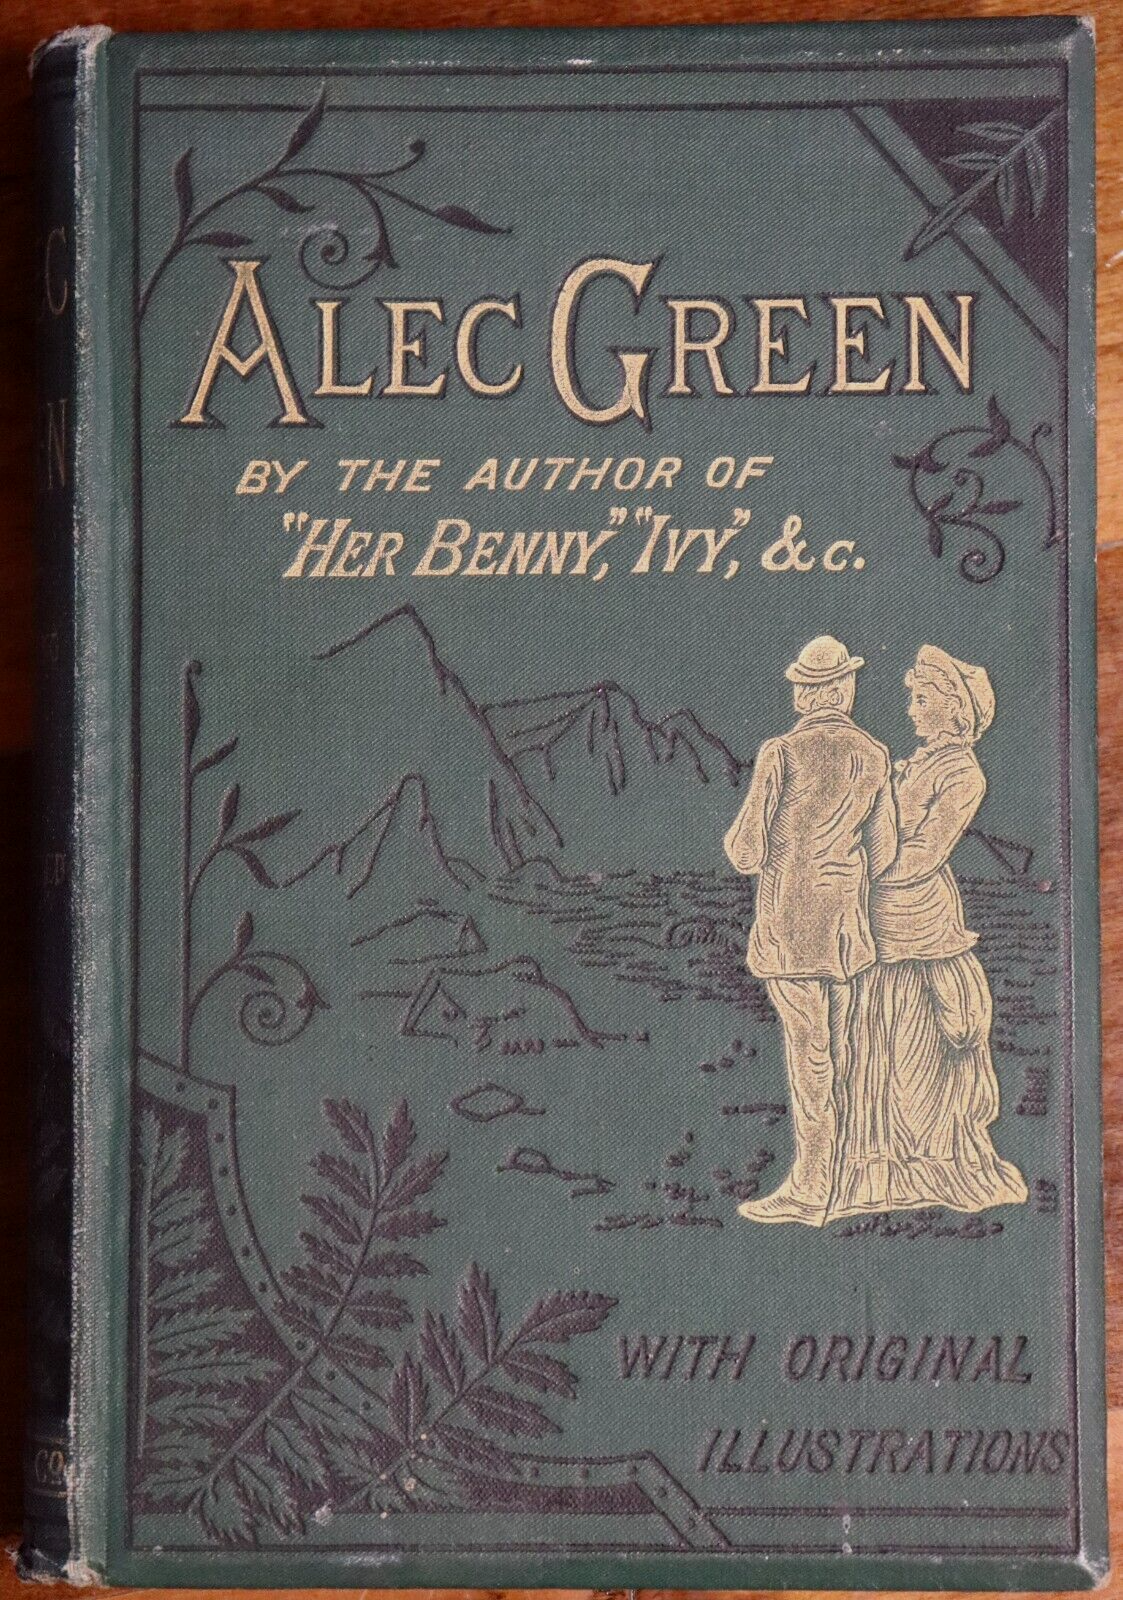 Alec Green by Silas K Hocking - c1880 - Antique Classic Literature Book